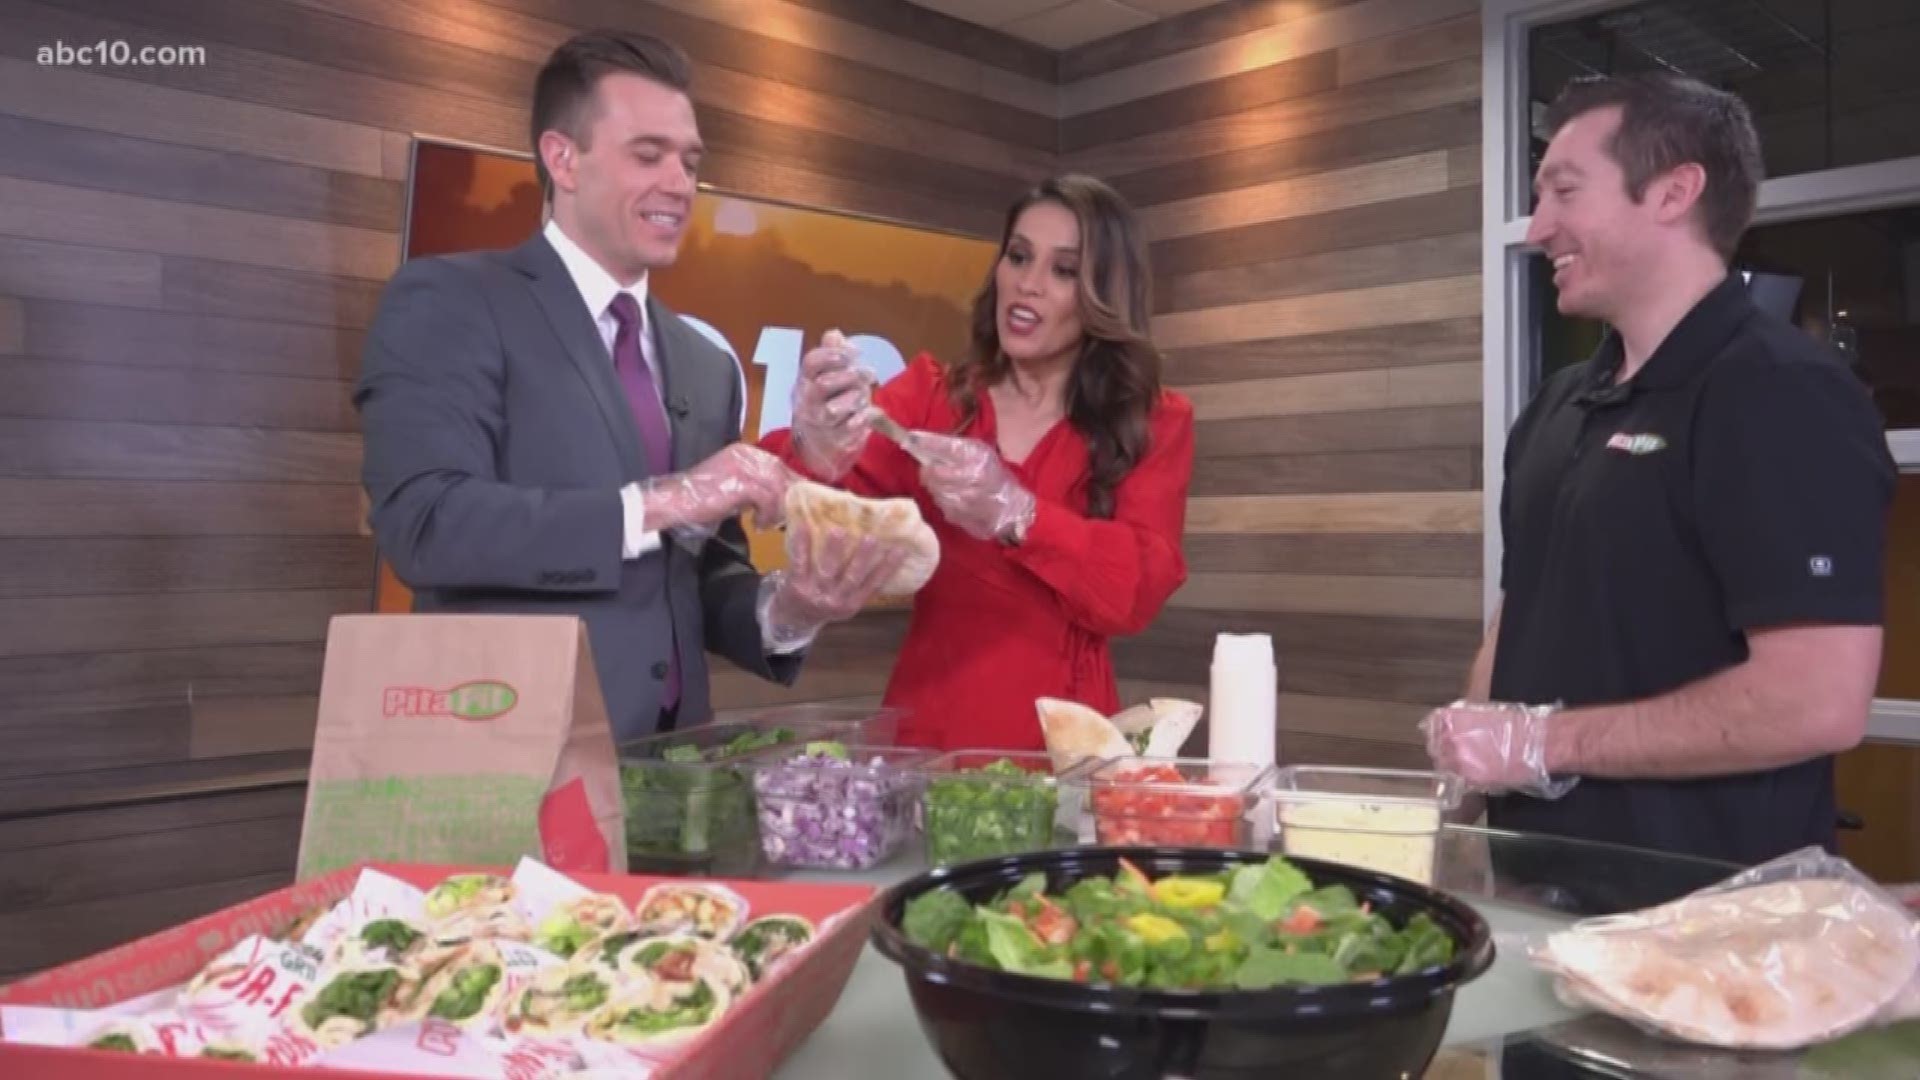 Jesse Gonzalez, a local Pita Pit franchisee, shows us how you can make your own, healthier versions of some of your favorite snacks, like bacon cheeseburgers and buffalo chicken wings.